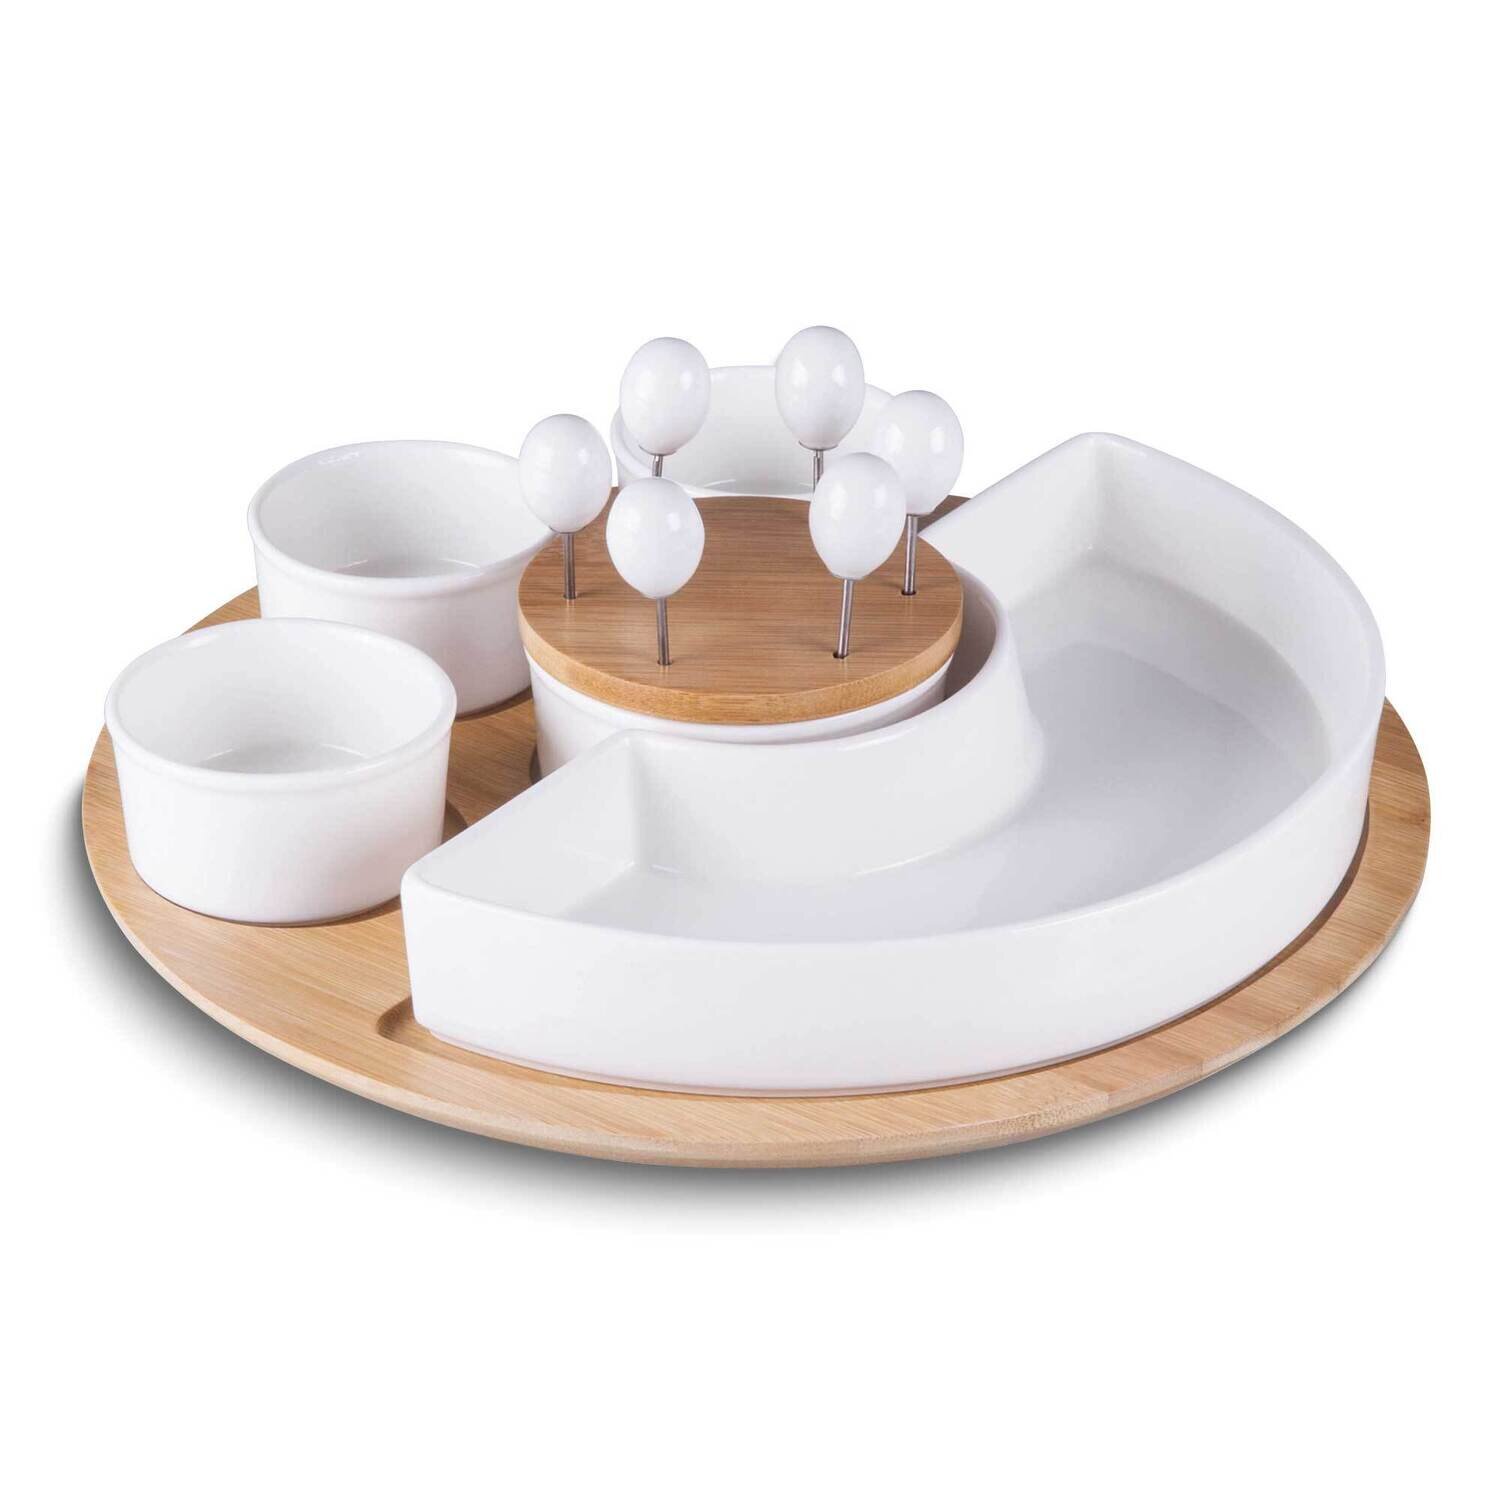 6 Piece Ceramic and Bamboo Serving Tray Set GM25036